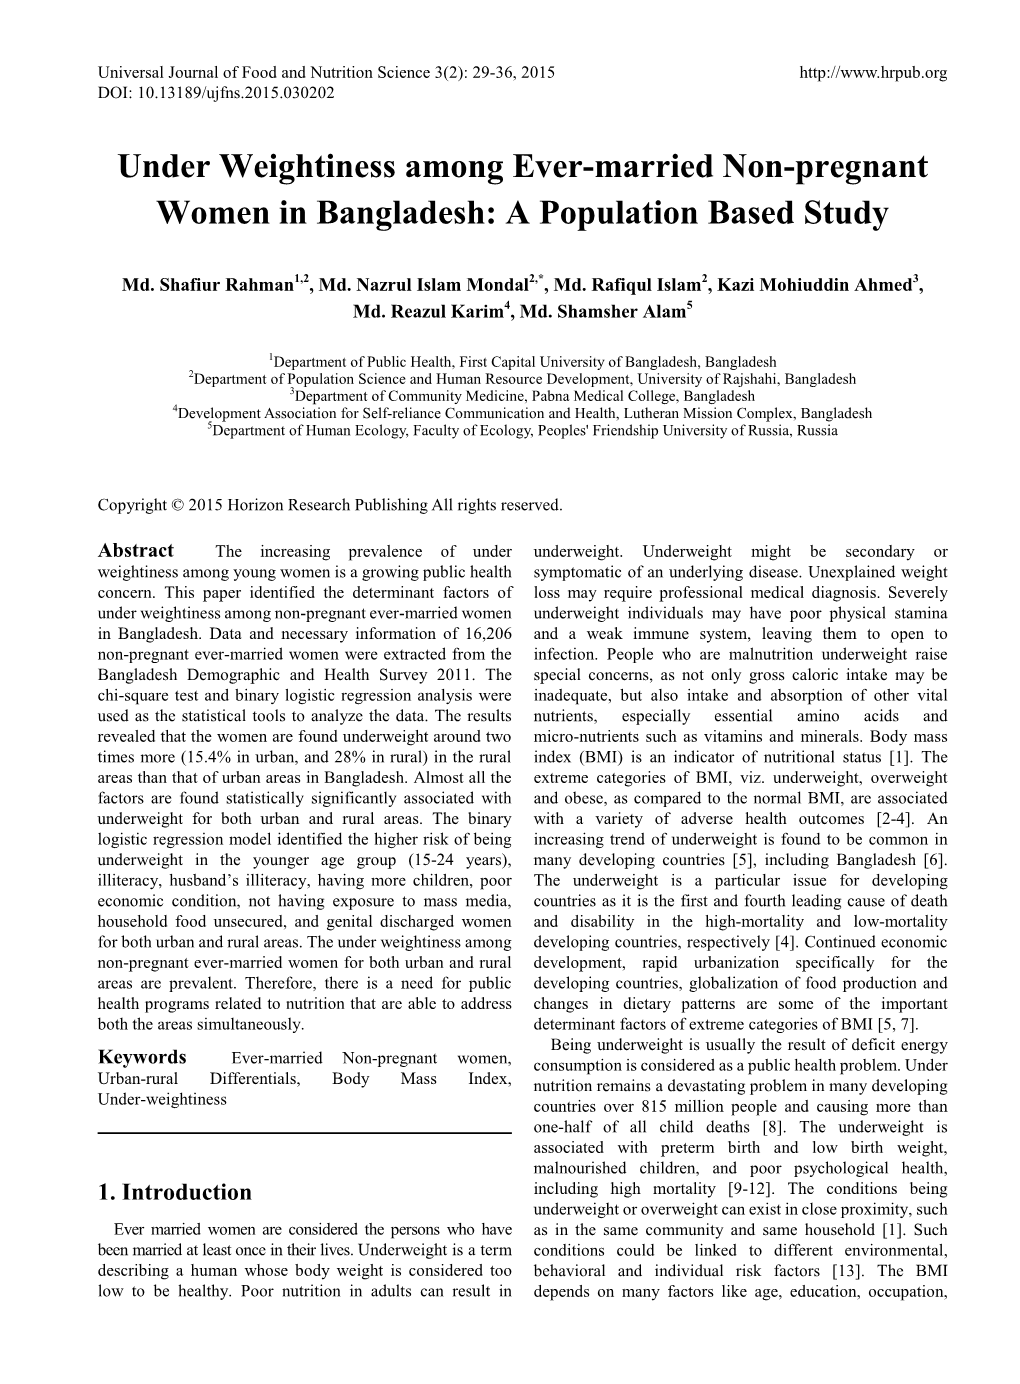 Under Weightiness Among Ever-Married Non-Pregnant Women in Bangladesh: a Population Based Study